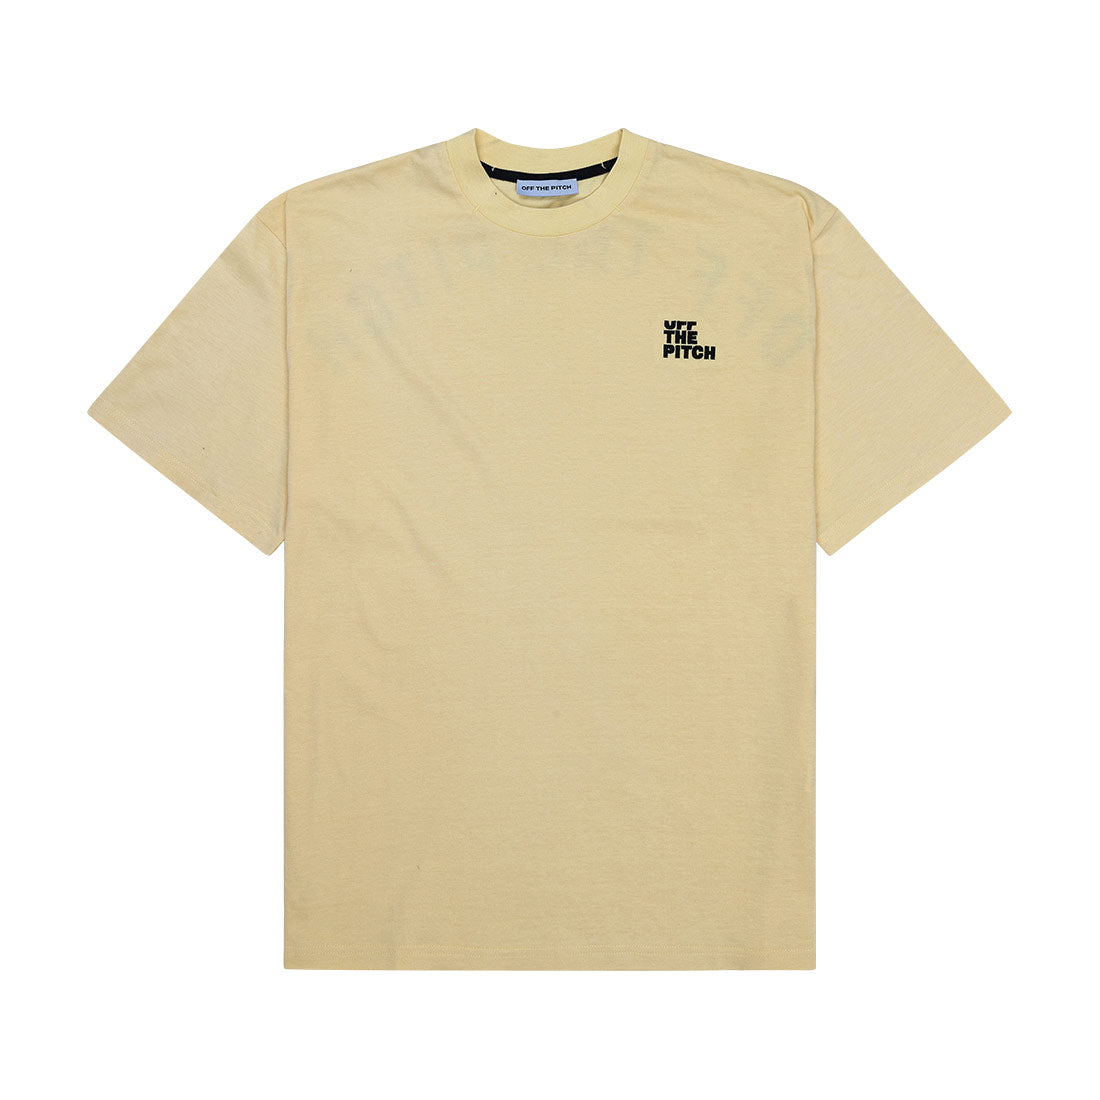 OFF THE PITCH | Loose Fit Pitch Tee - Yellow